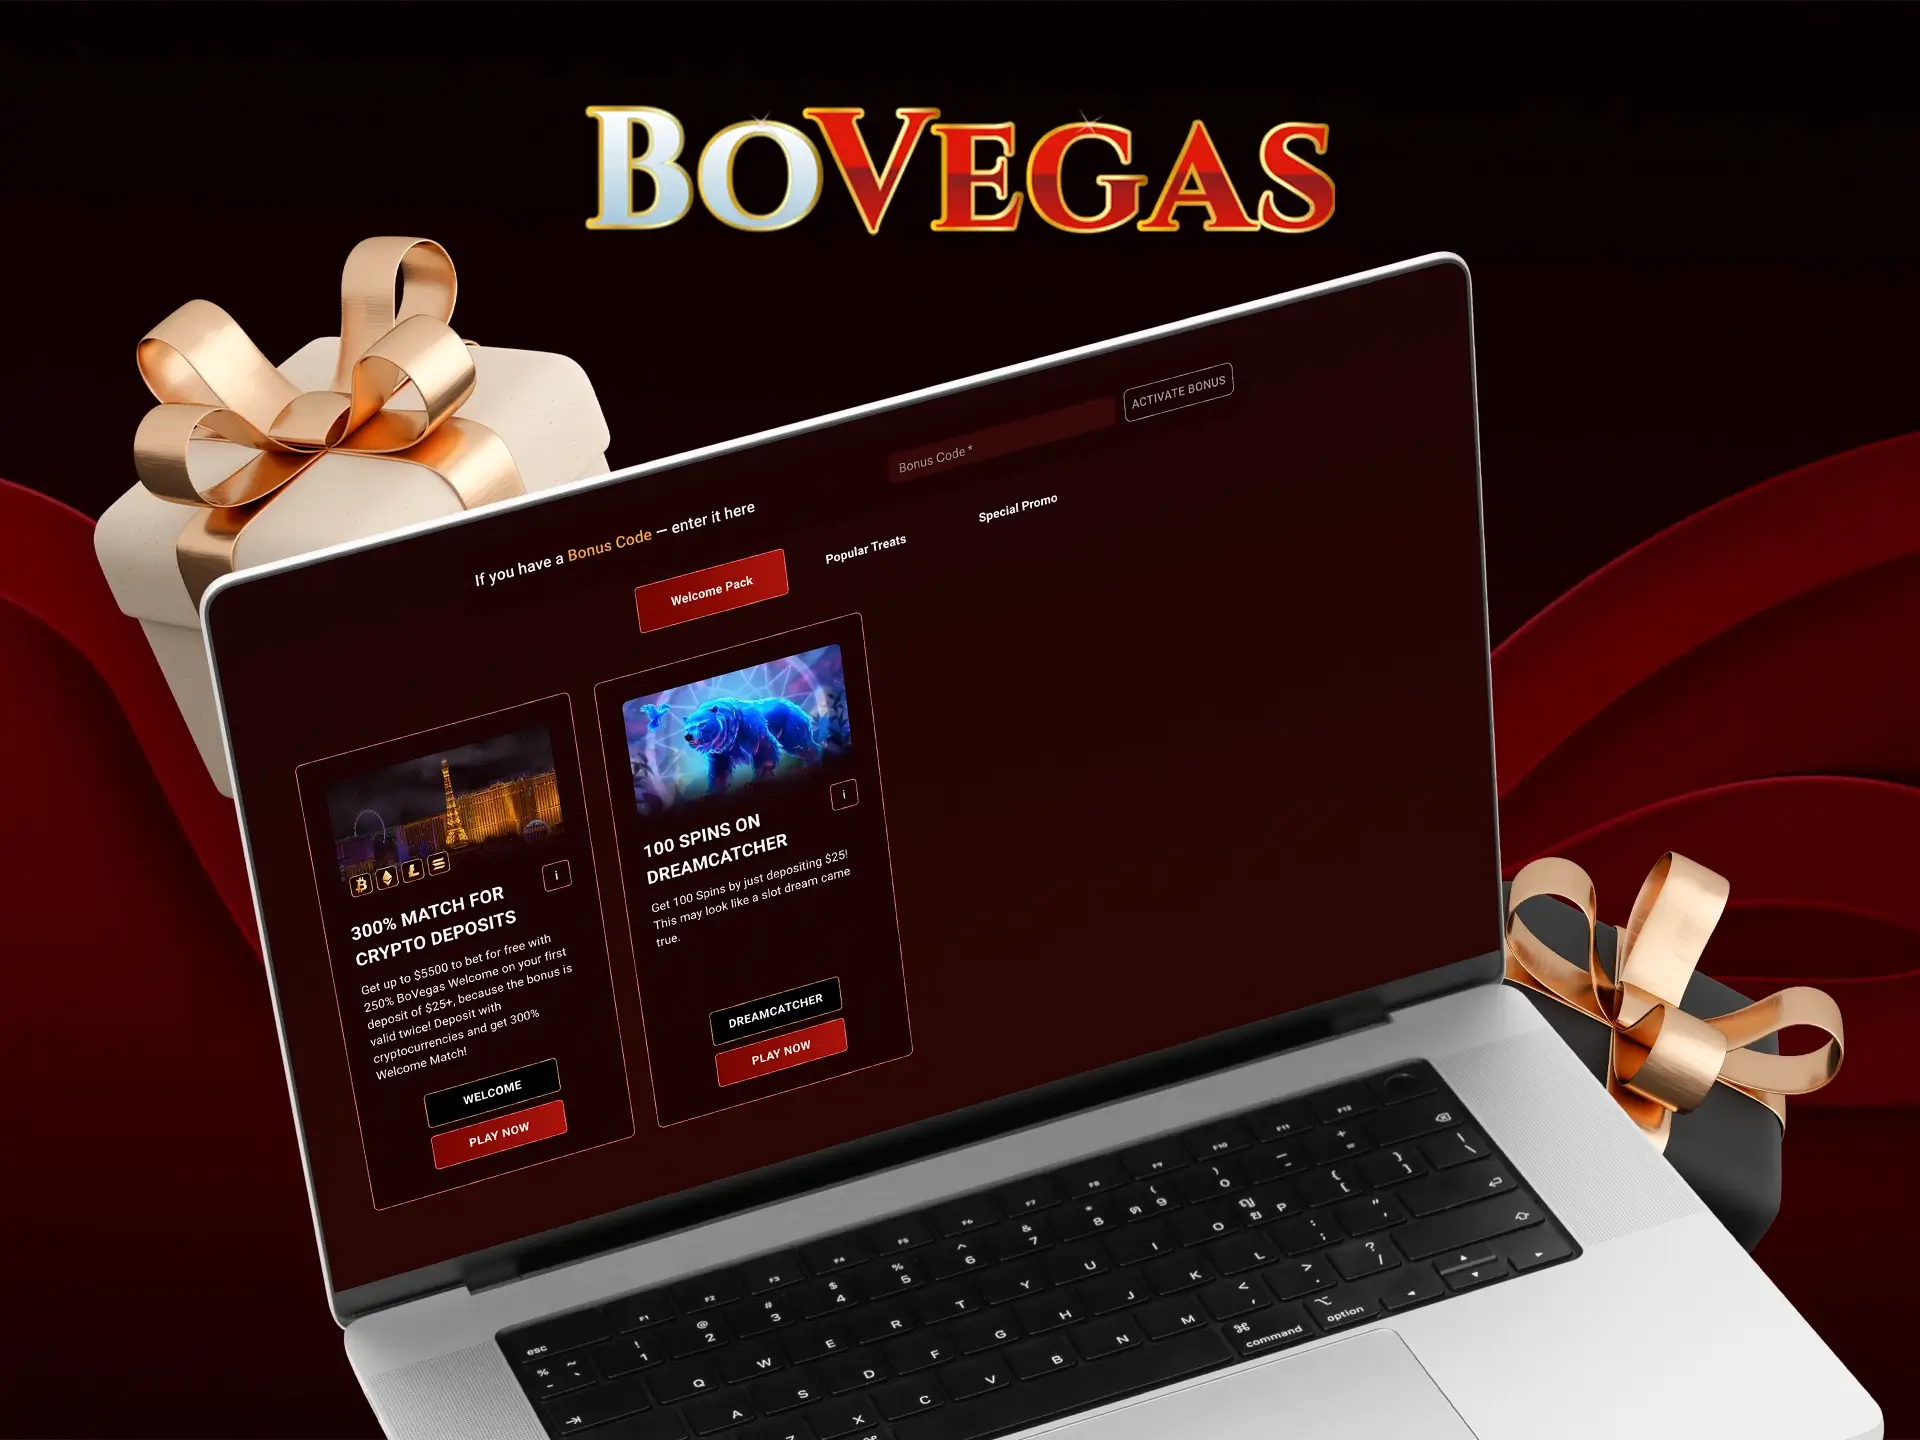 Use bonuses from BoVegas Casino to try your hand at jackpot games and gain experience and confidence.